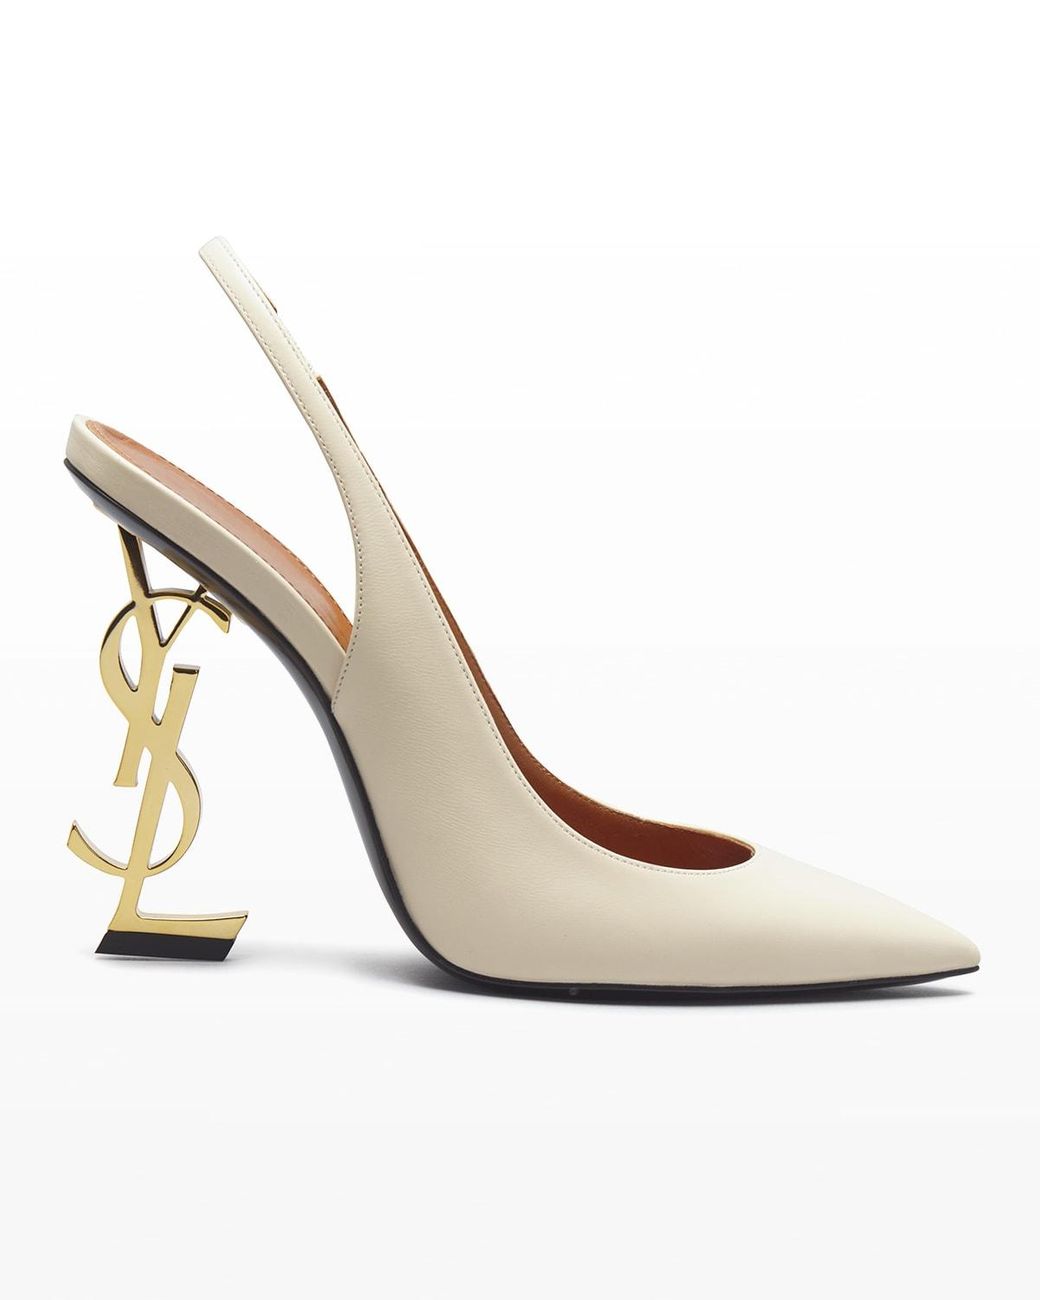 Saint Laurent Opyum Ysl Pointed Leather Pumps in White | Lyst